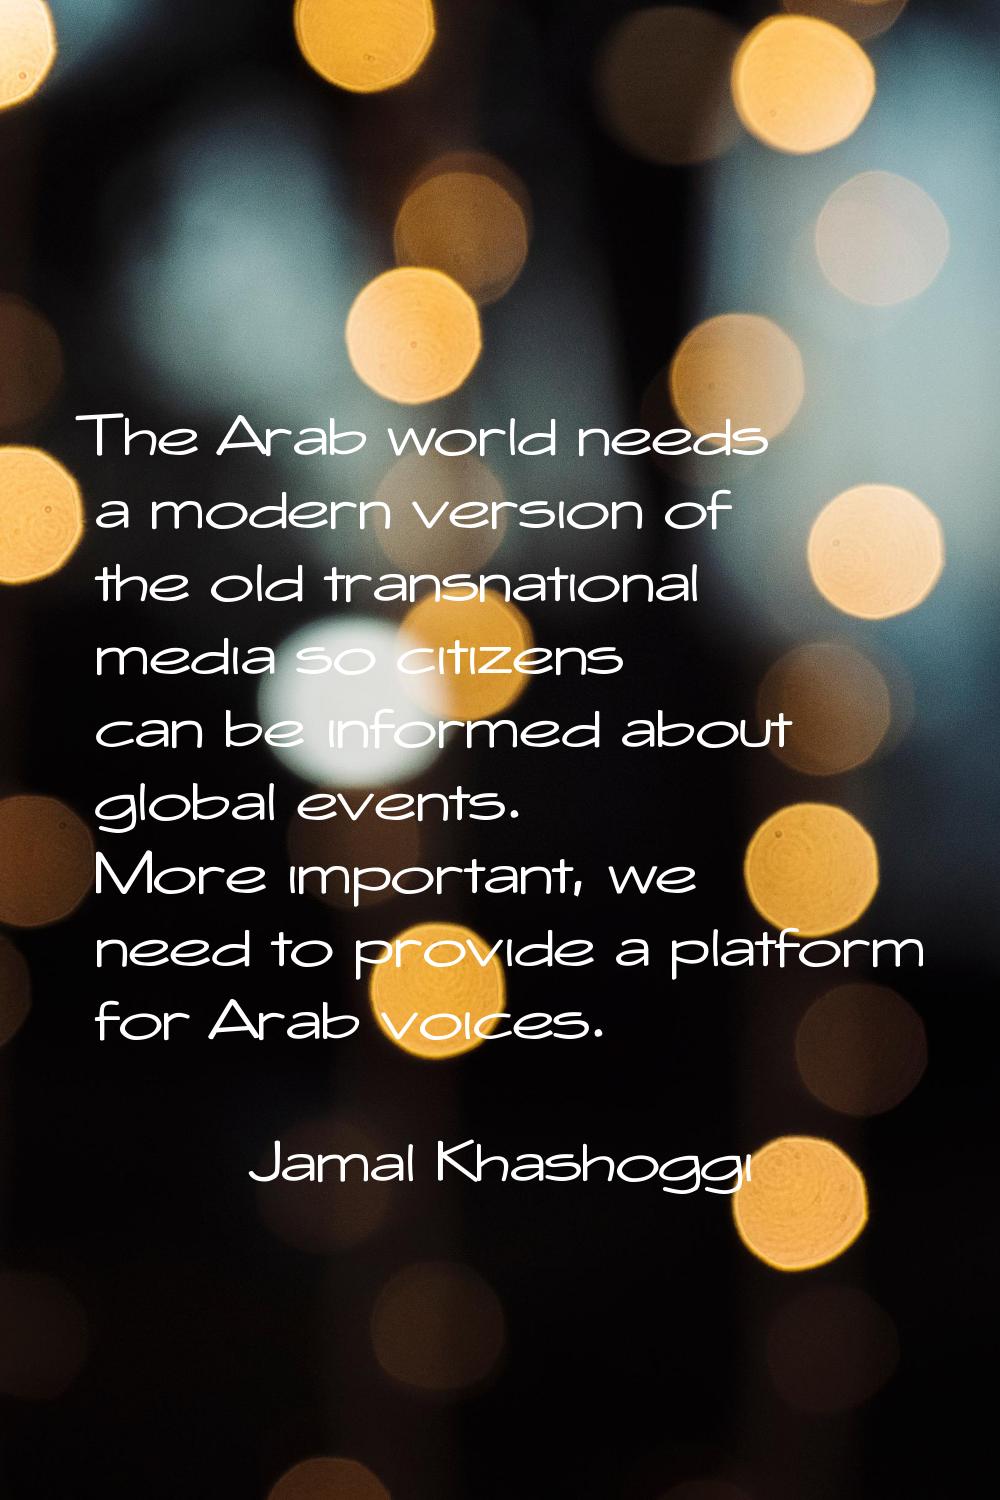 The Arab world needs a modern version of the old transnational media so citizens can be informed ab